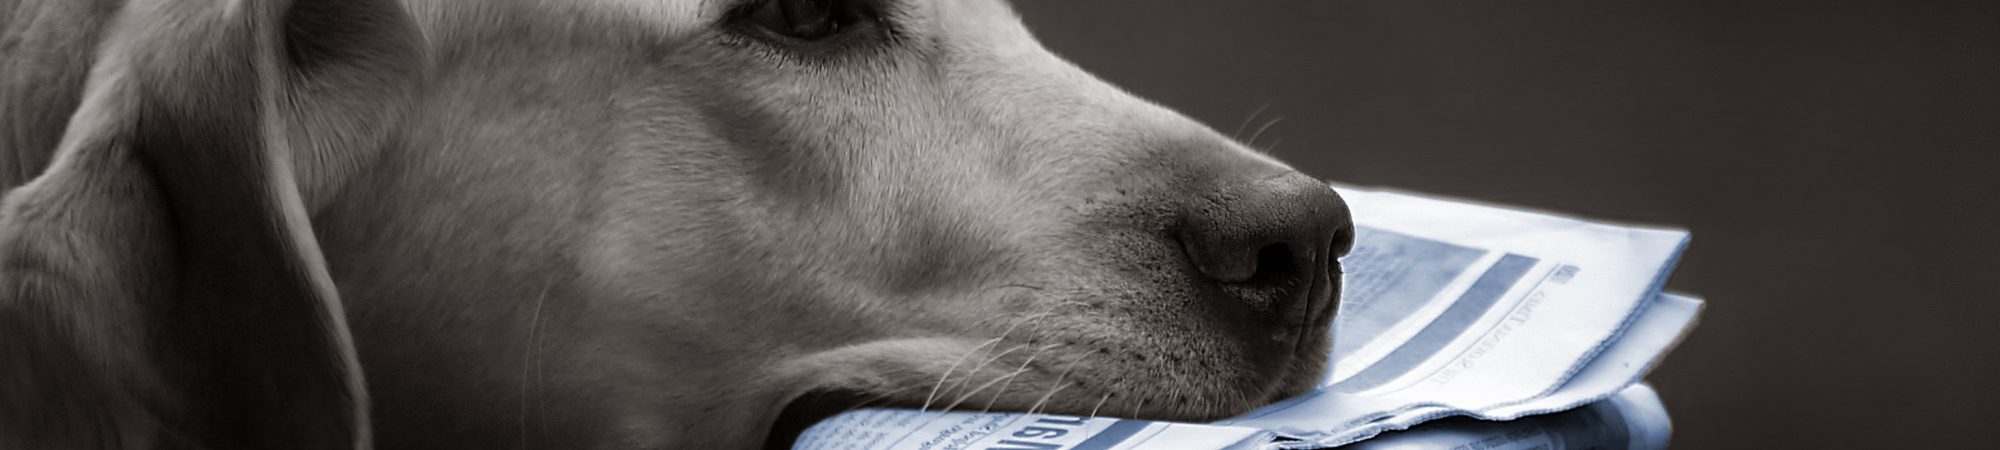 Dog with a newspaper in it's mouth